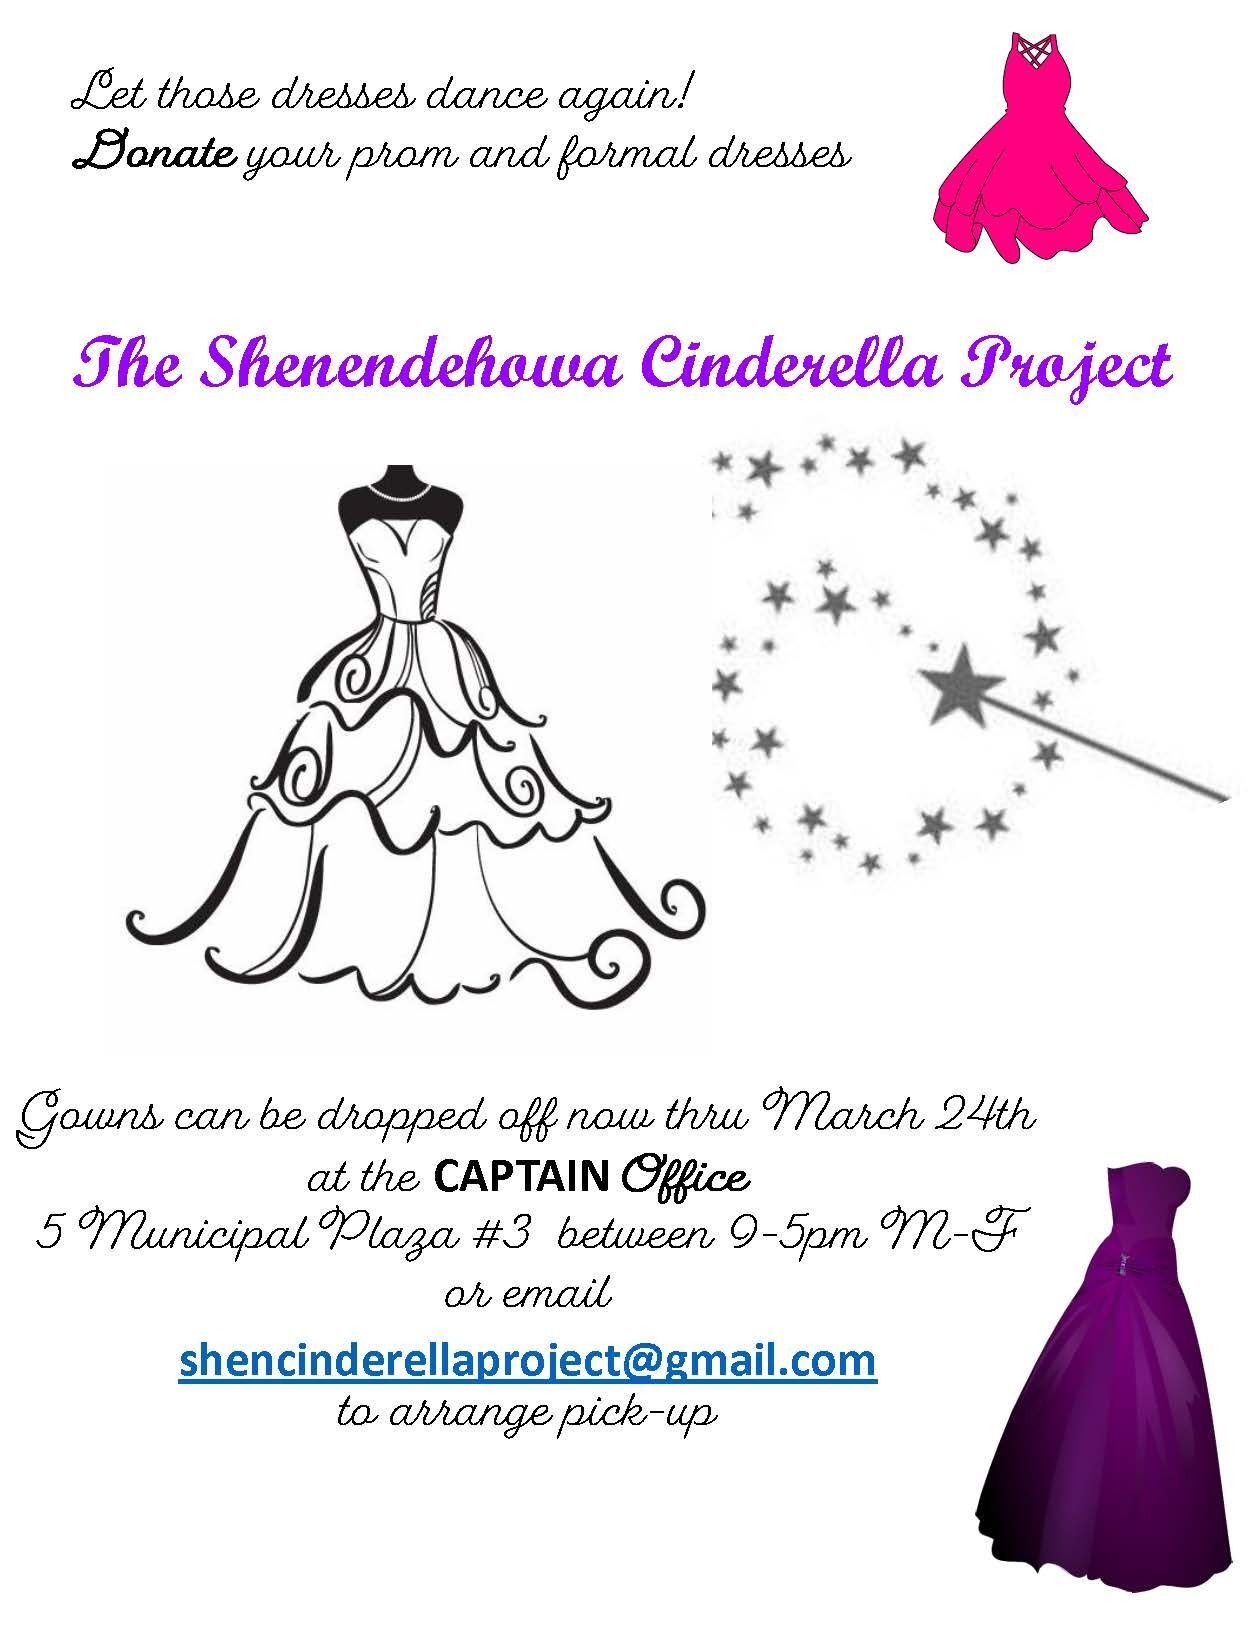 The Shenendehowa Cinderella Project: Looking for Dresses!